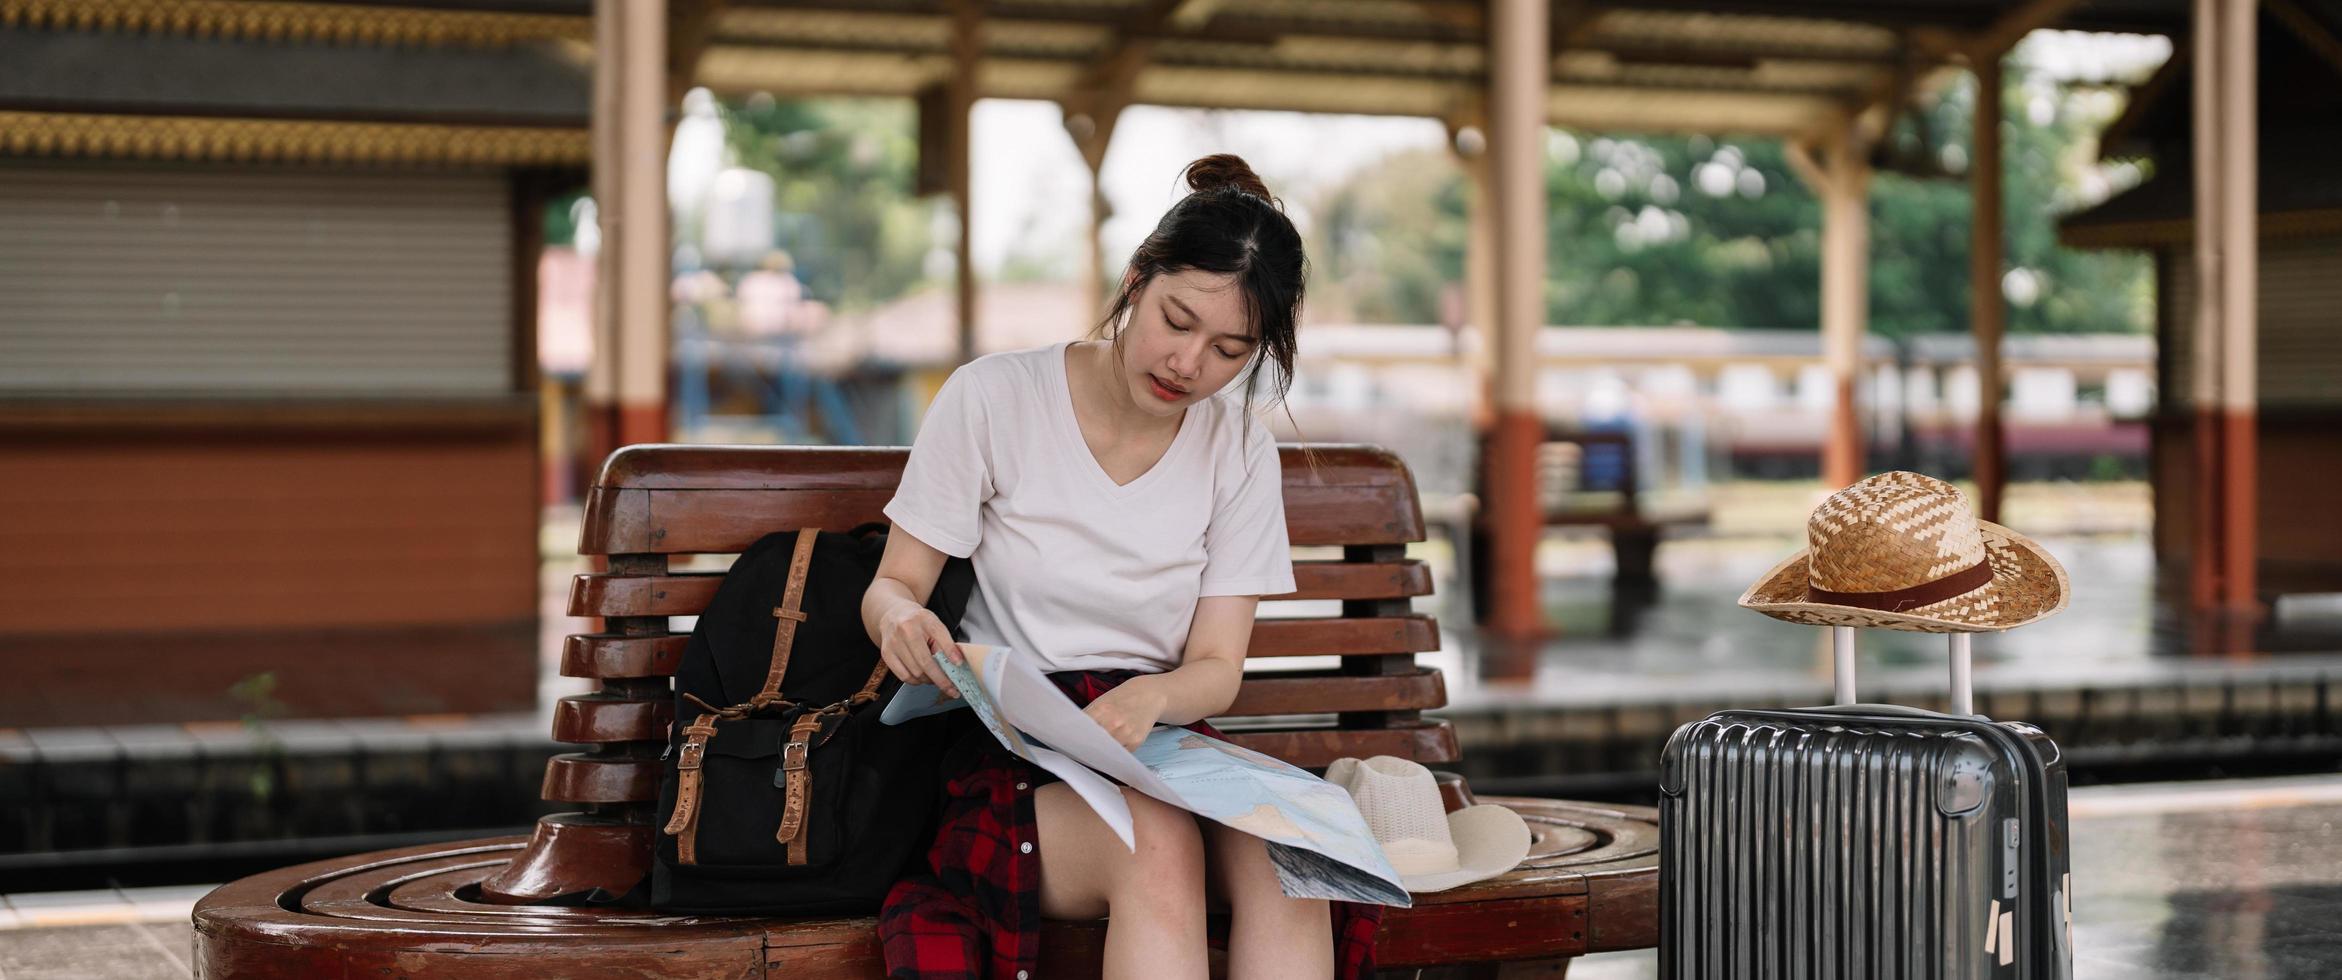 young asian woman traveler sitting with map choose where to travel and bag waiting for train at train station, summer vacation travel concept photo